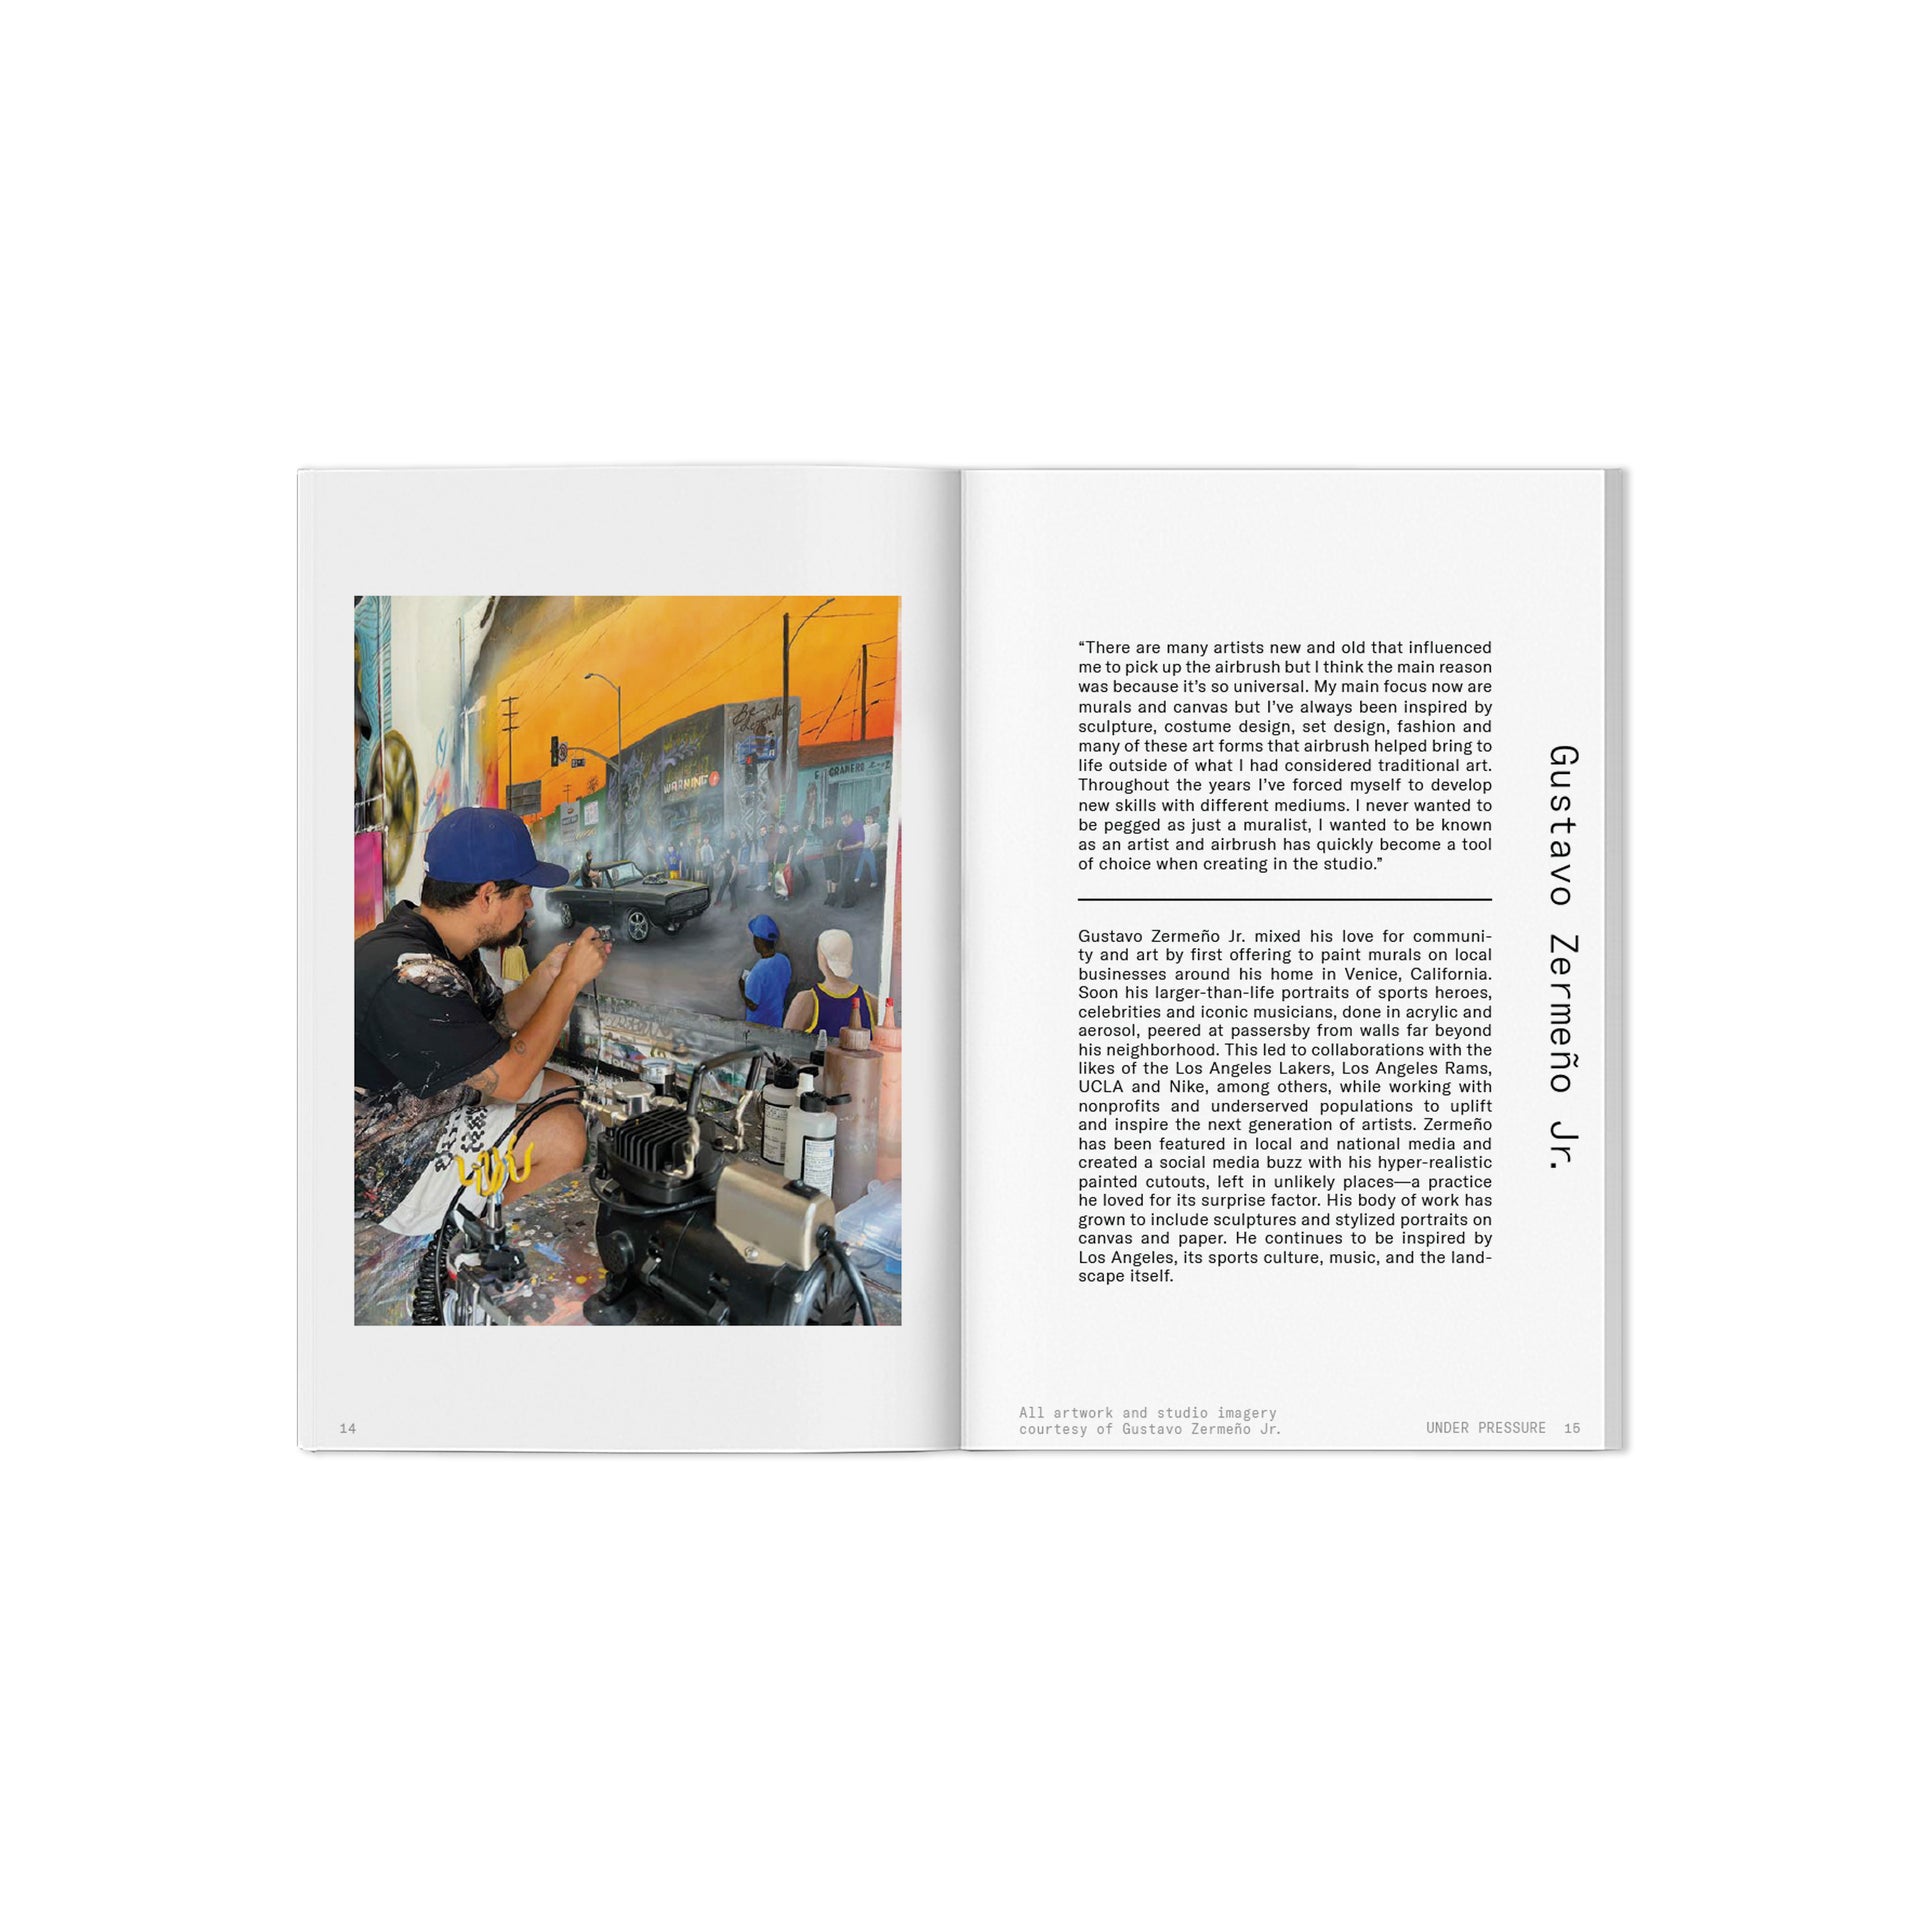 BEYOND THE STREETS & CONTROL Gallery "Exhibition 009: UNDER PRESSURE" Catalogue